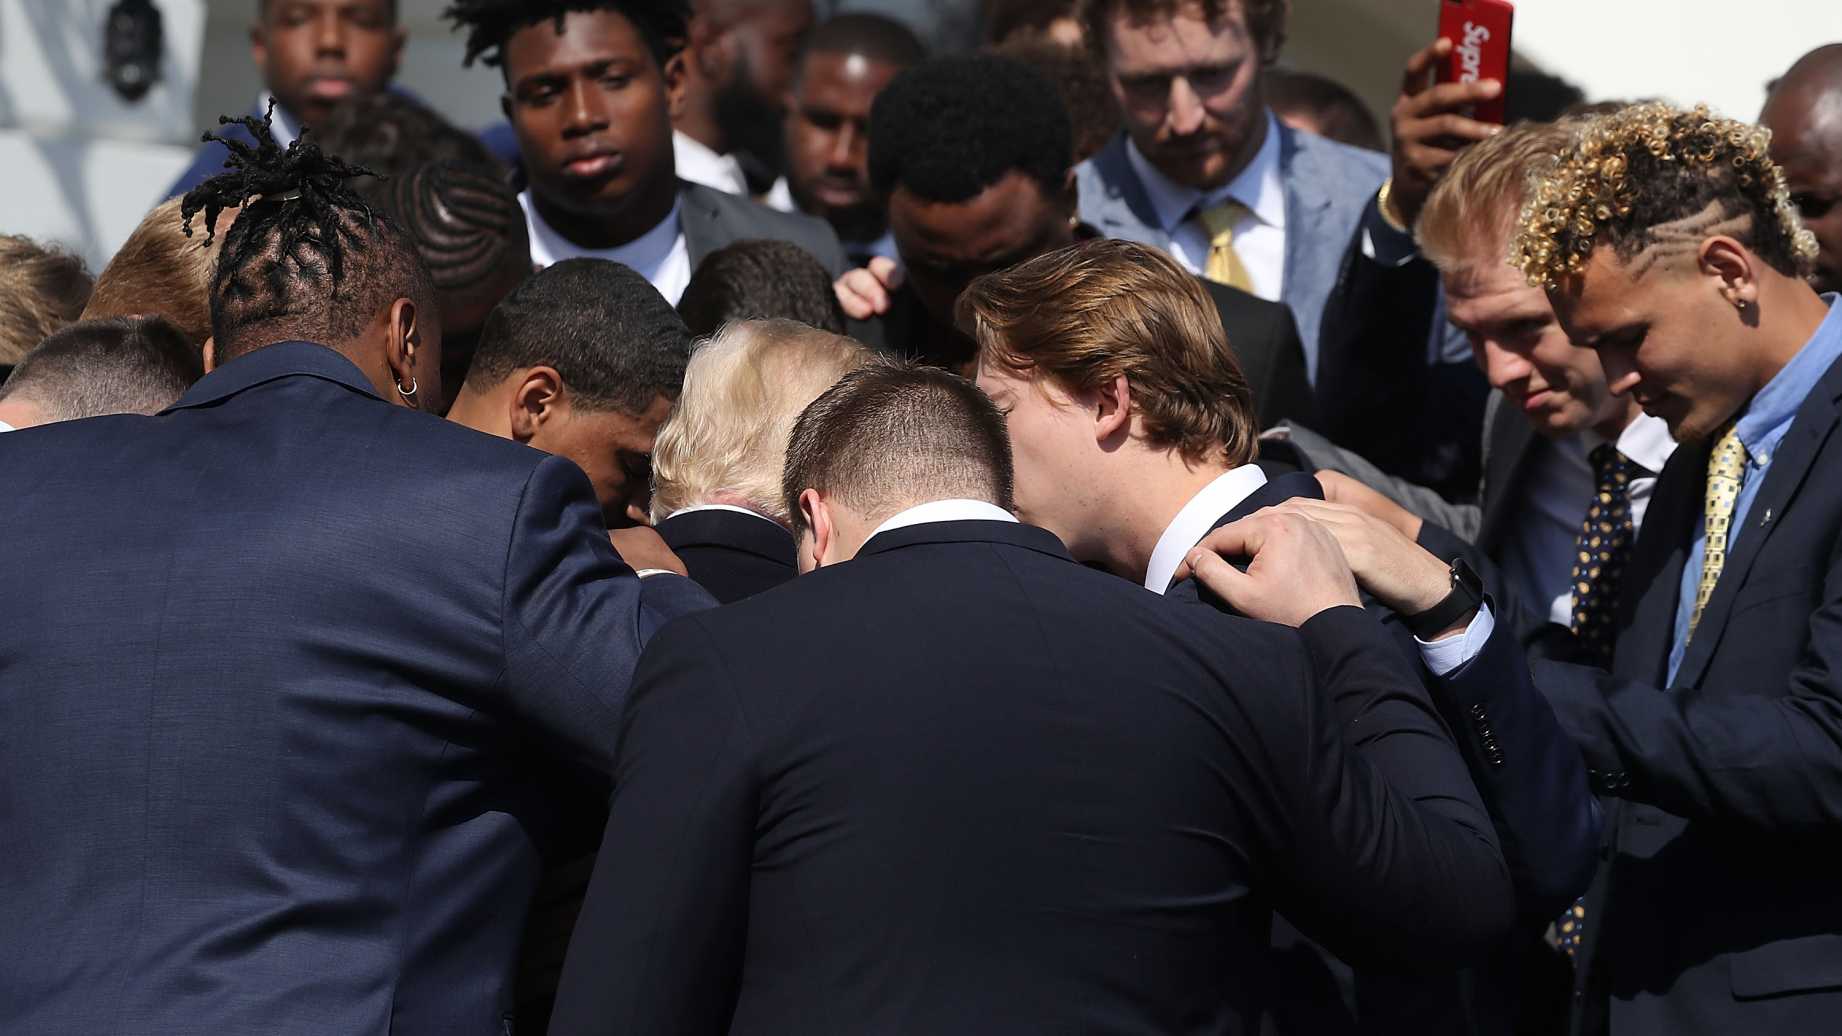 WATCH: Alabama’s Football Team Prays For Trump At White House